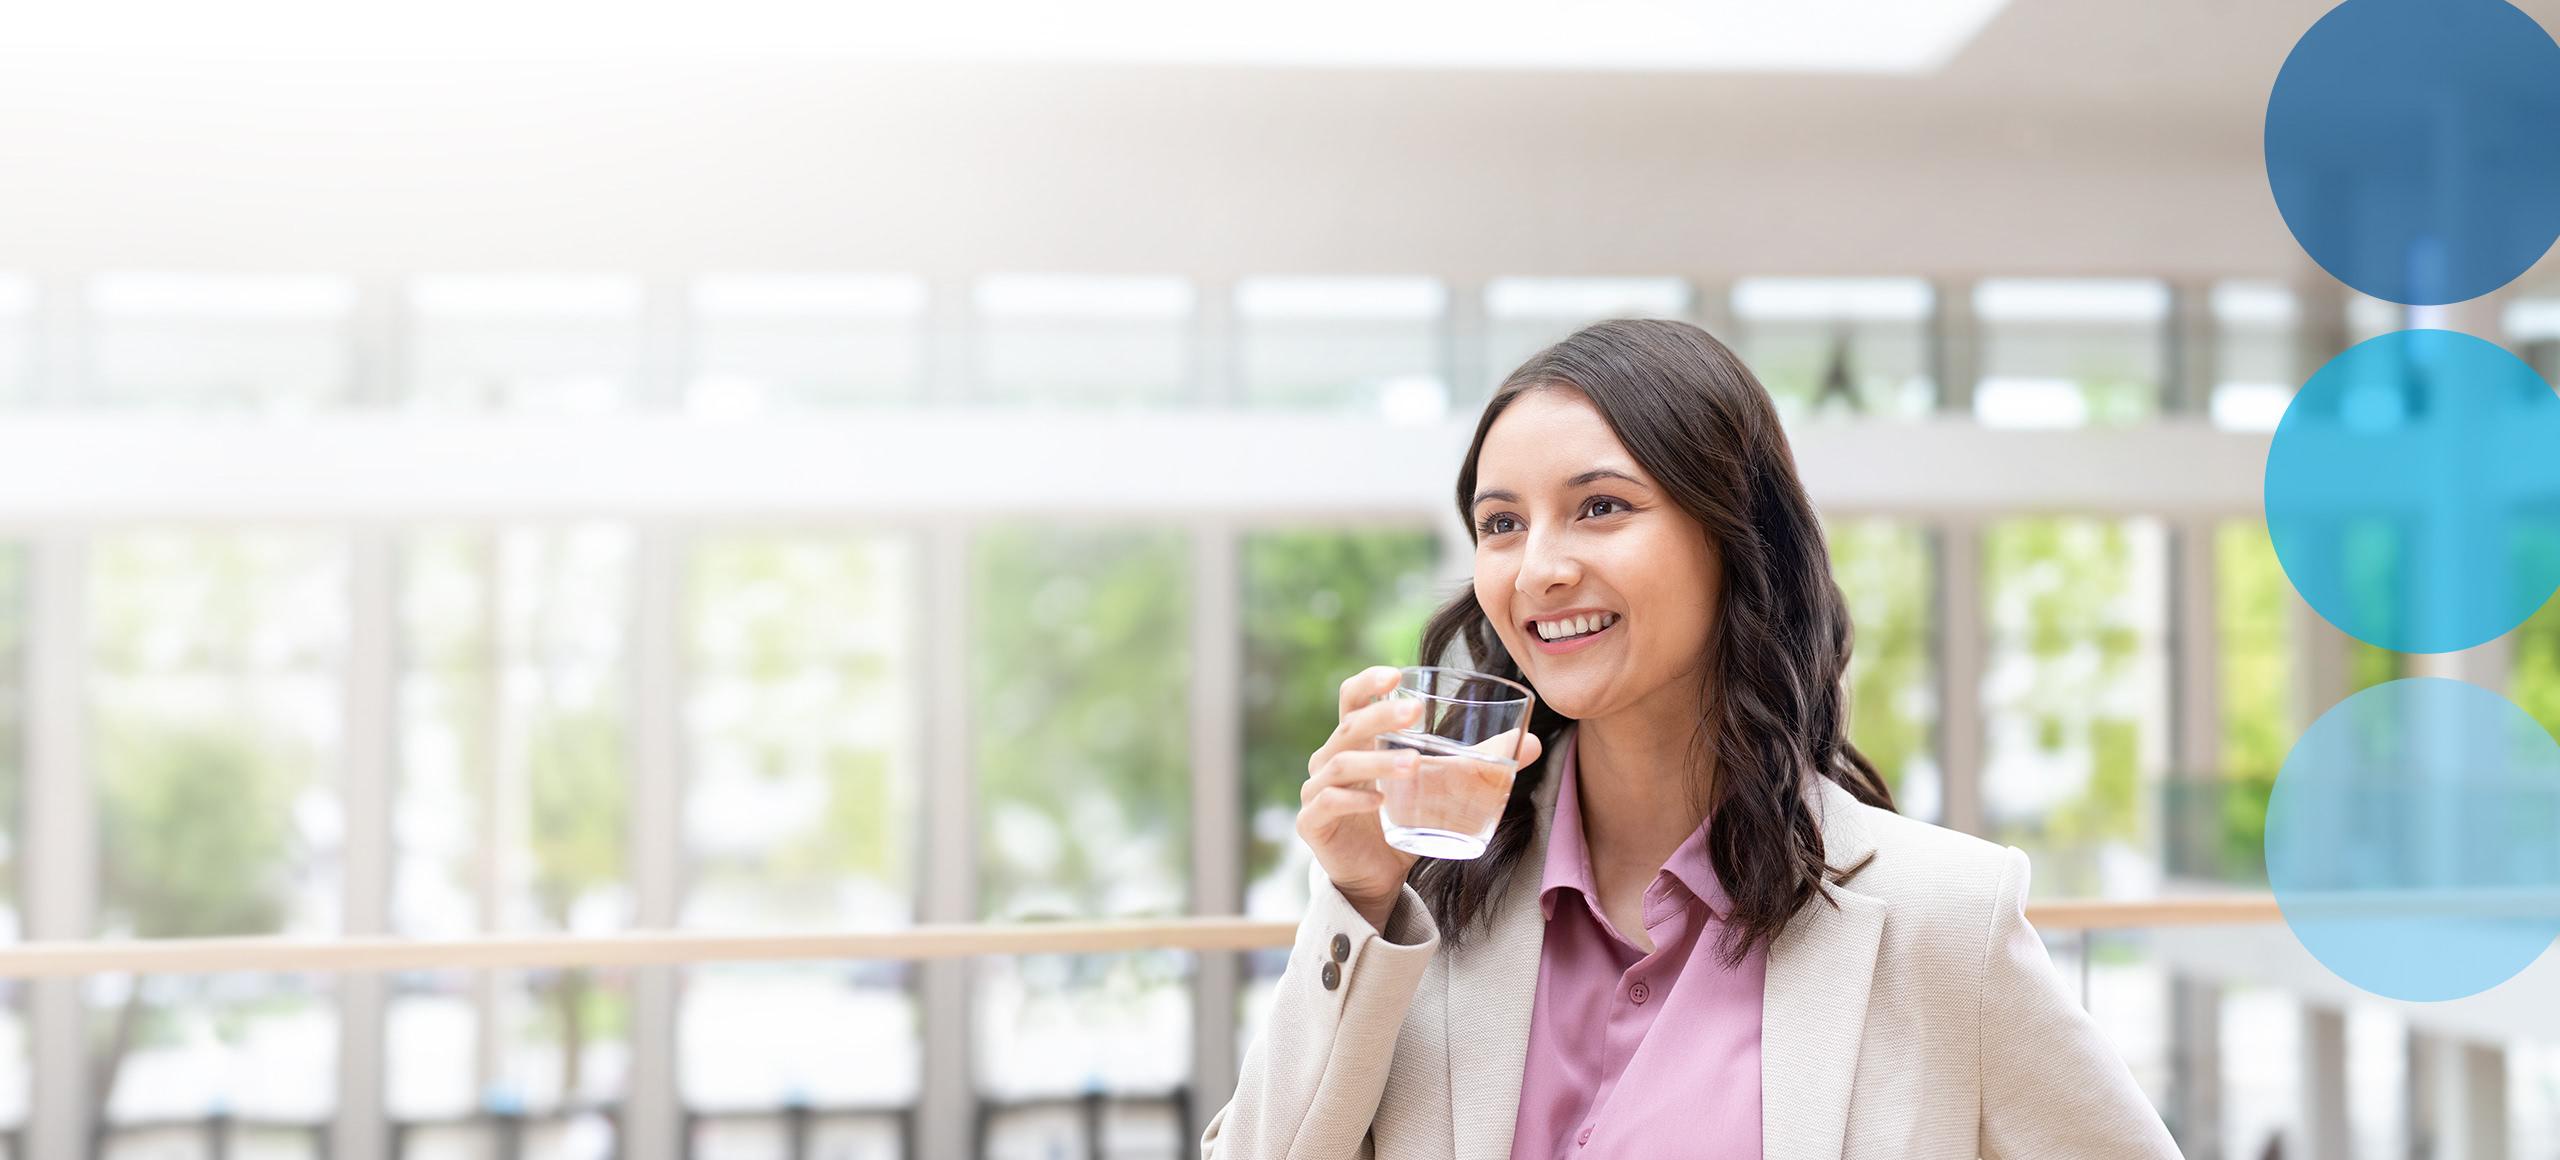 Woman in business suit holding water glass.